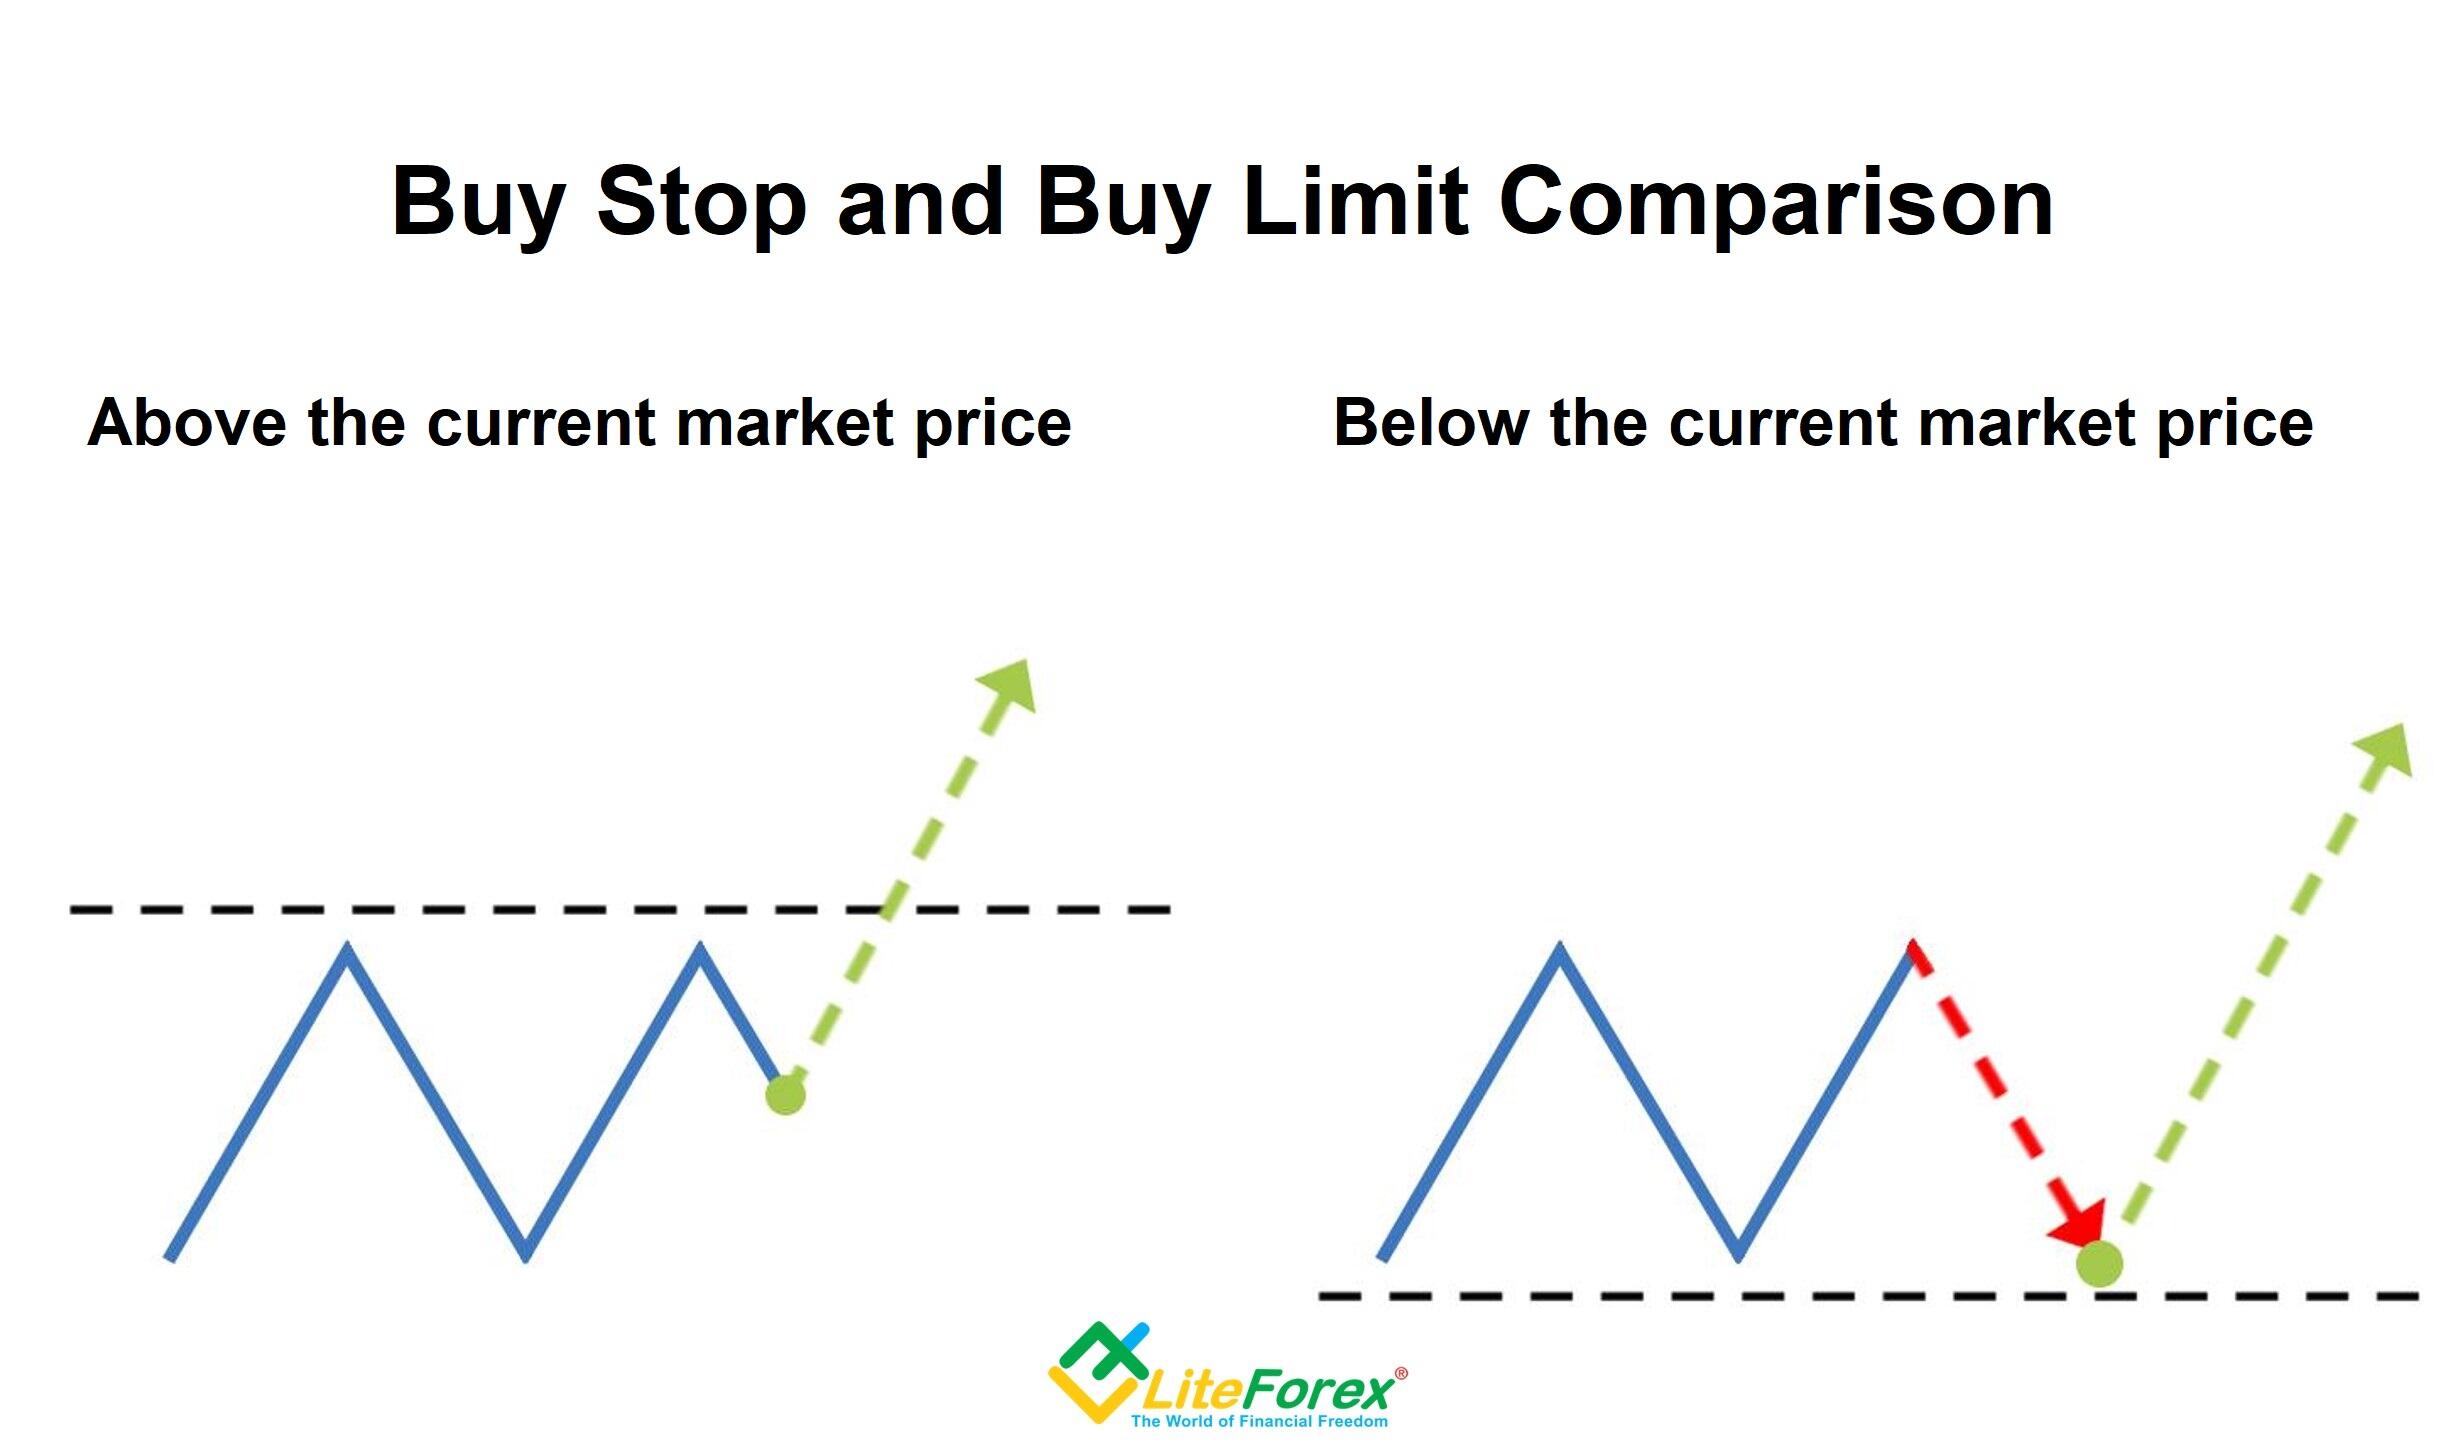 LiteFinance: Types of Forex Orders: Market, Limit, and Stop | Buy and Sell Orders | Litefinance